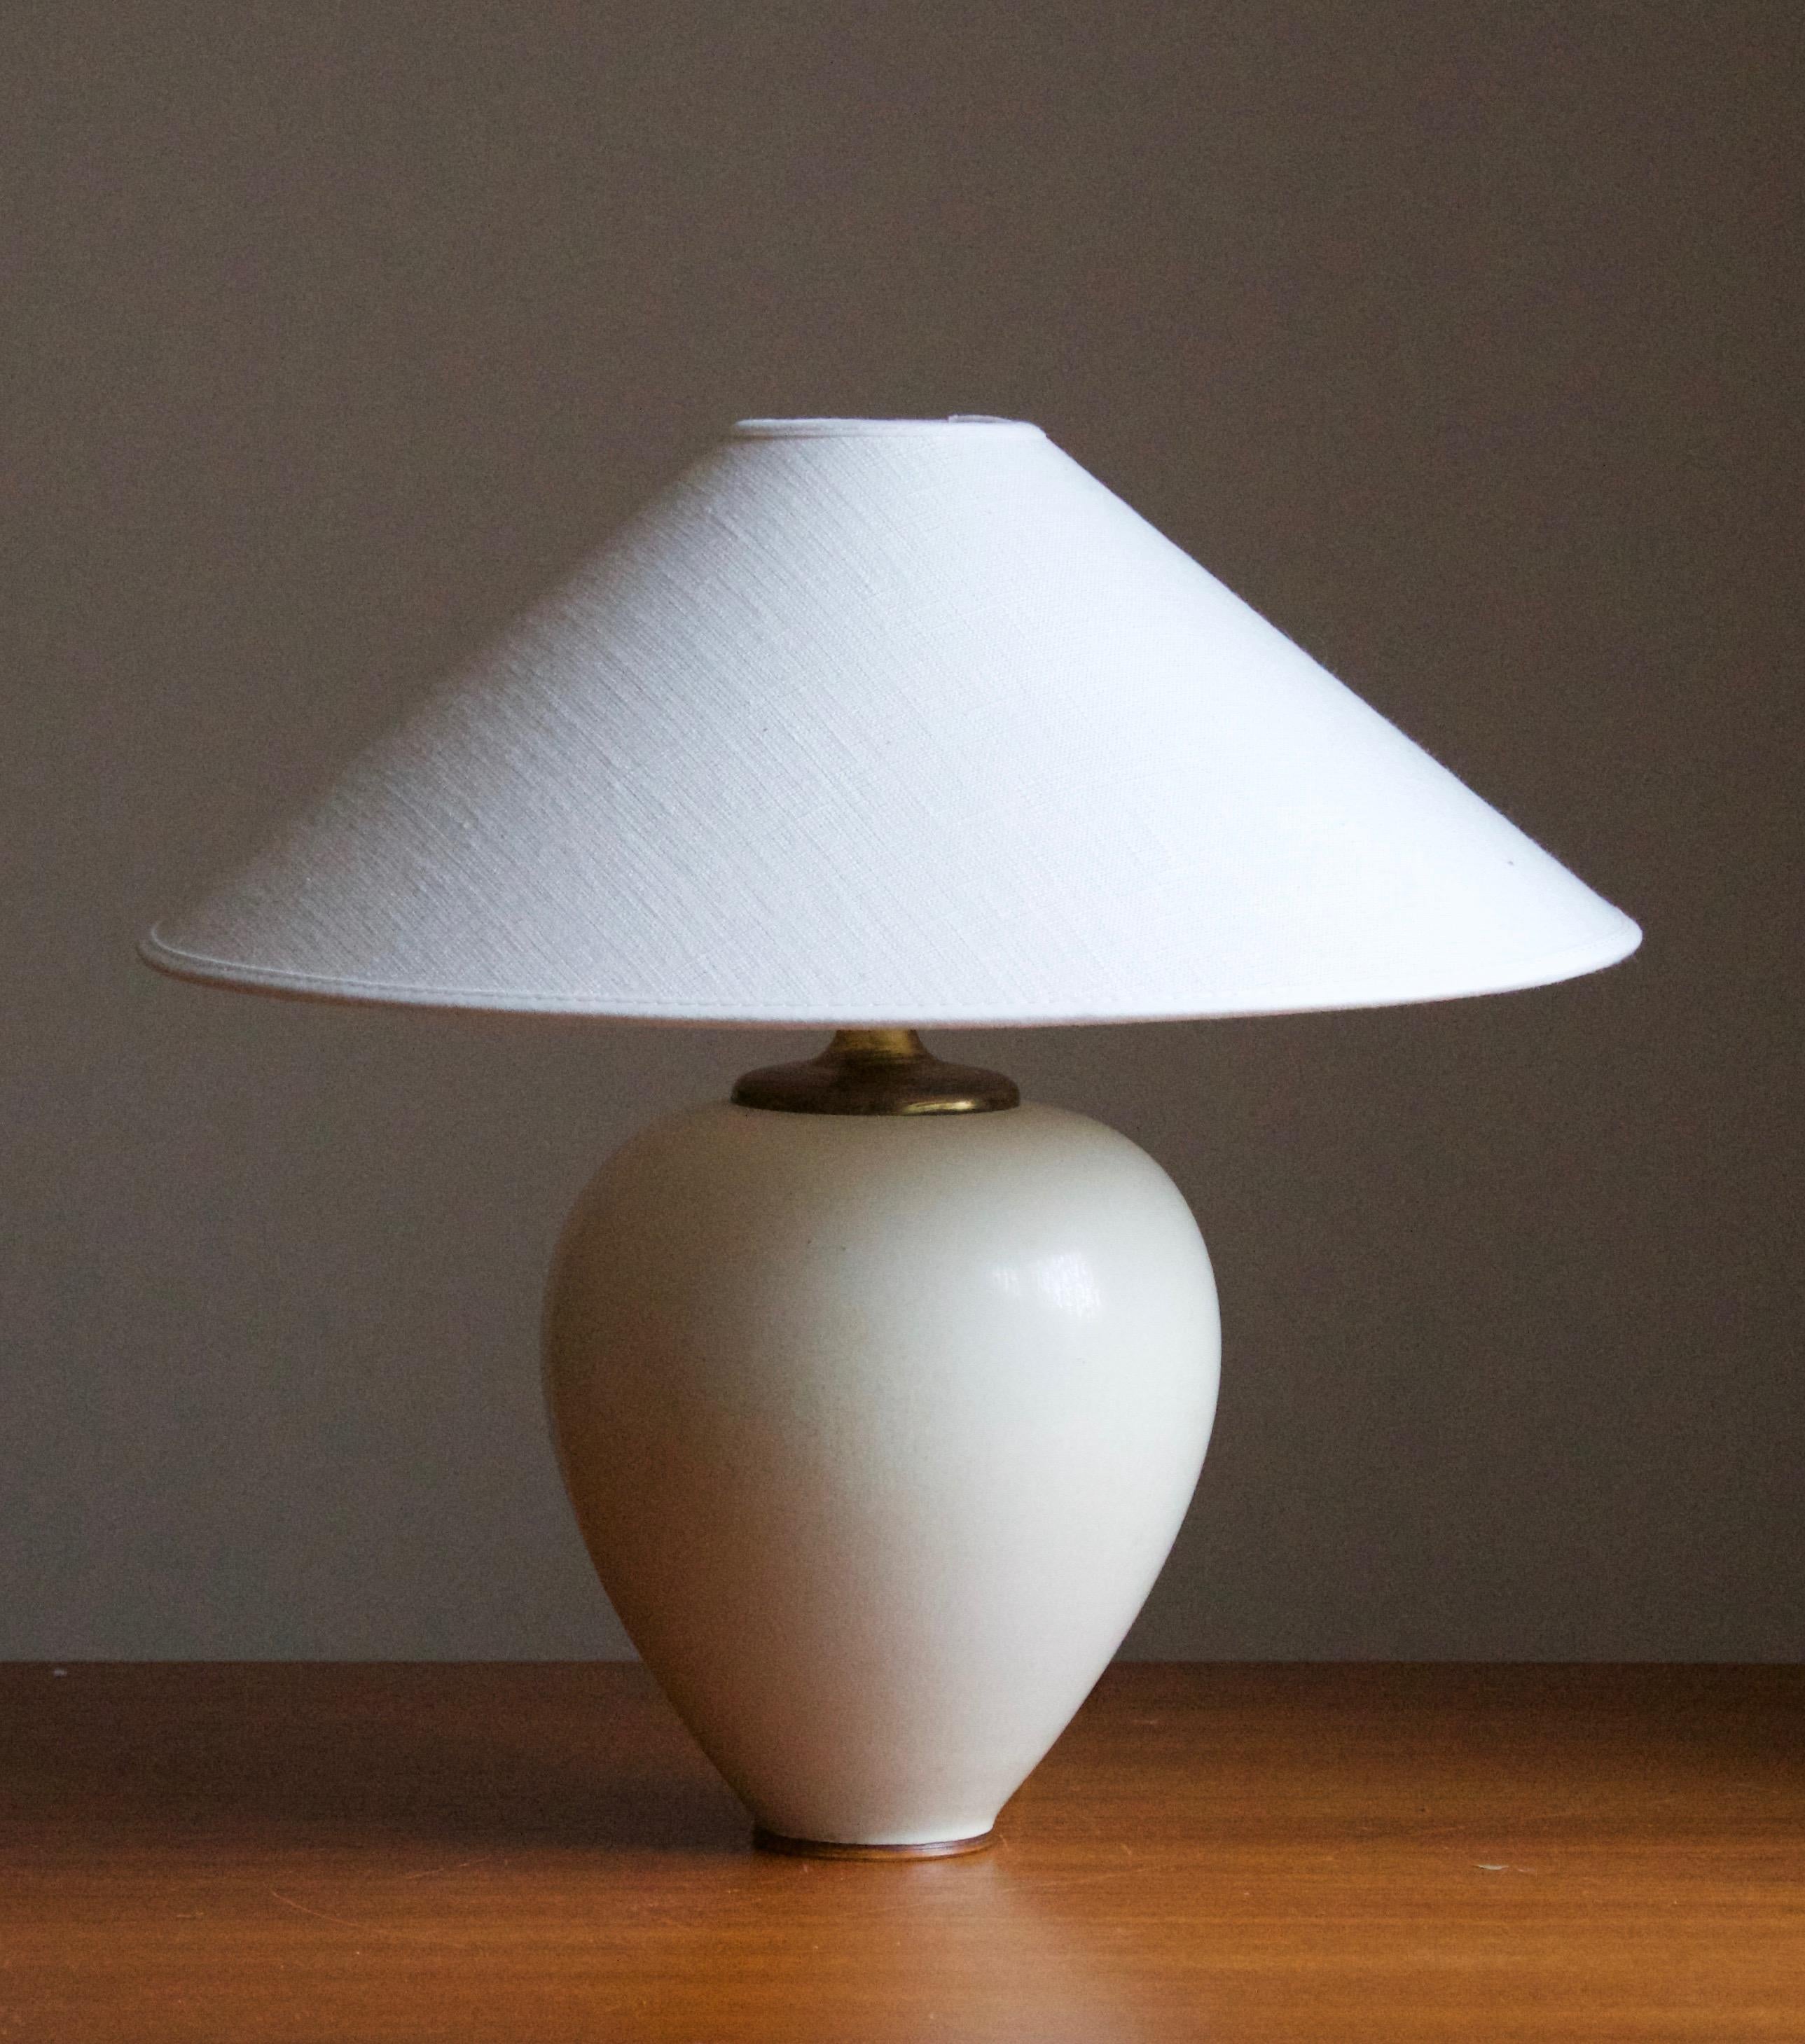 Table lamp by Berndt Friberg for the Swedish firm Gustavsberg. Signed to underside.

Other ceramicists of the period include Berndt Friberg, Axel Salto, Carl-Harry Stålhane, and Wilhelm Kåge.